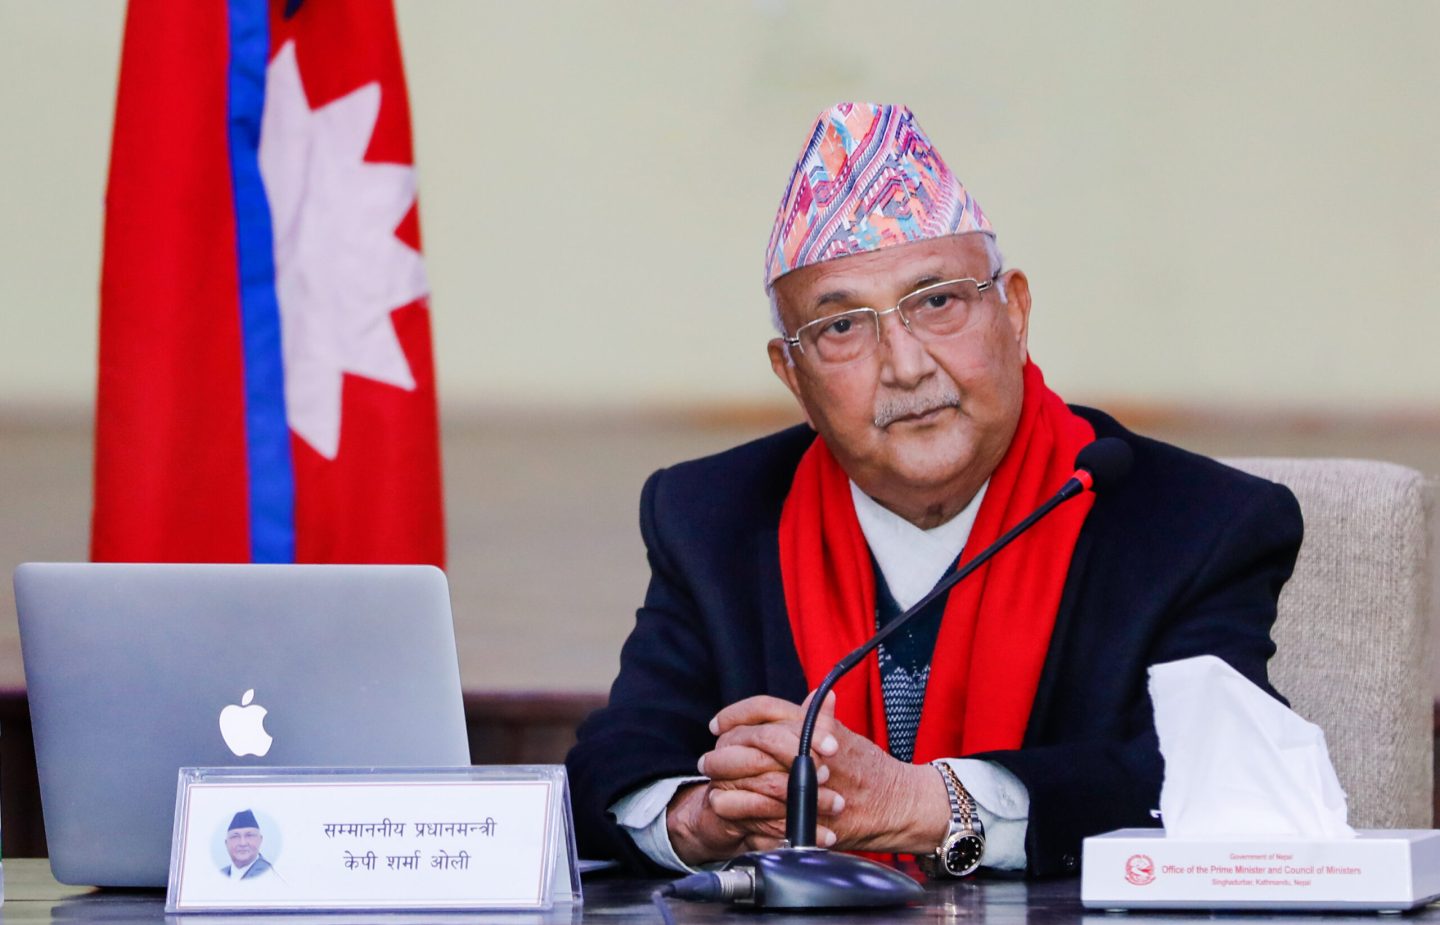 Baidya’s statement highy objectionable and criminal in nature: UML